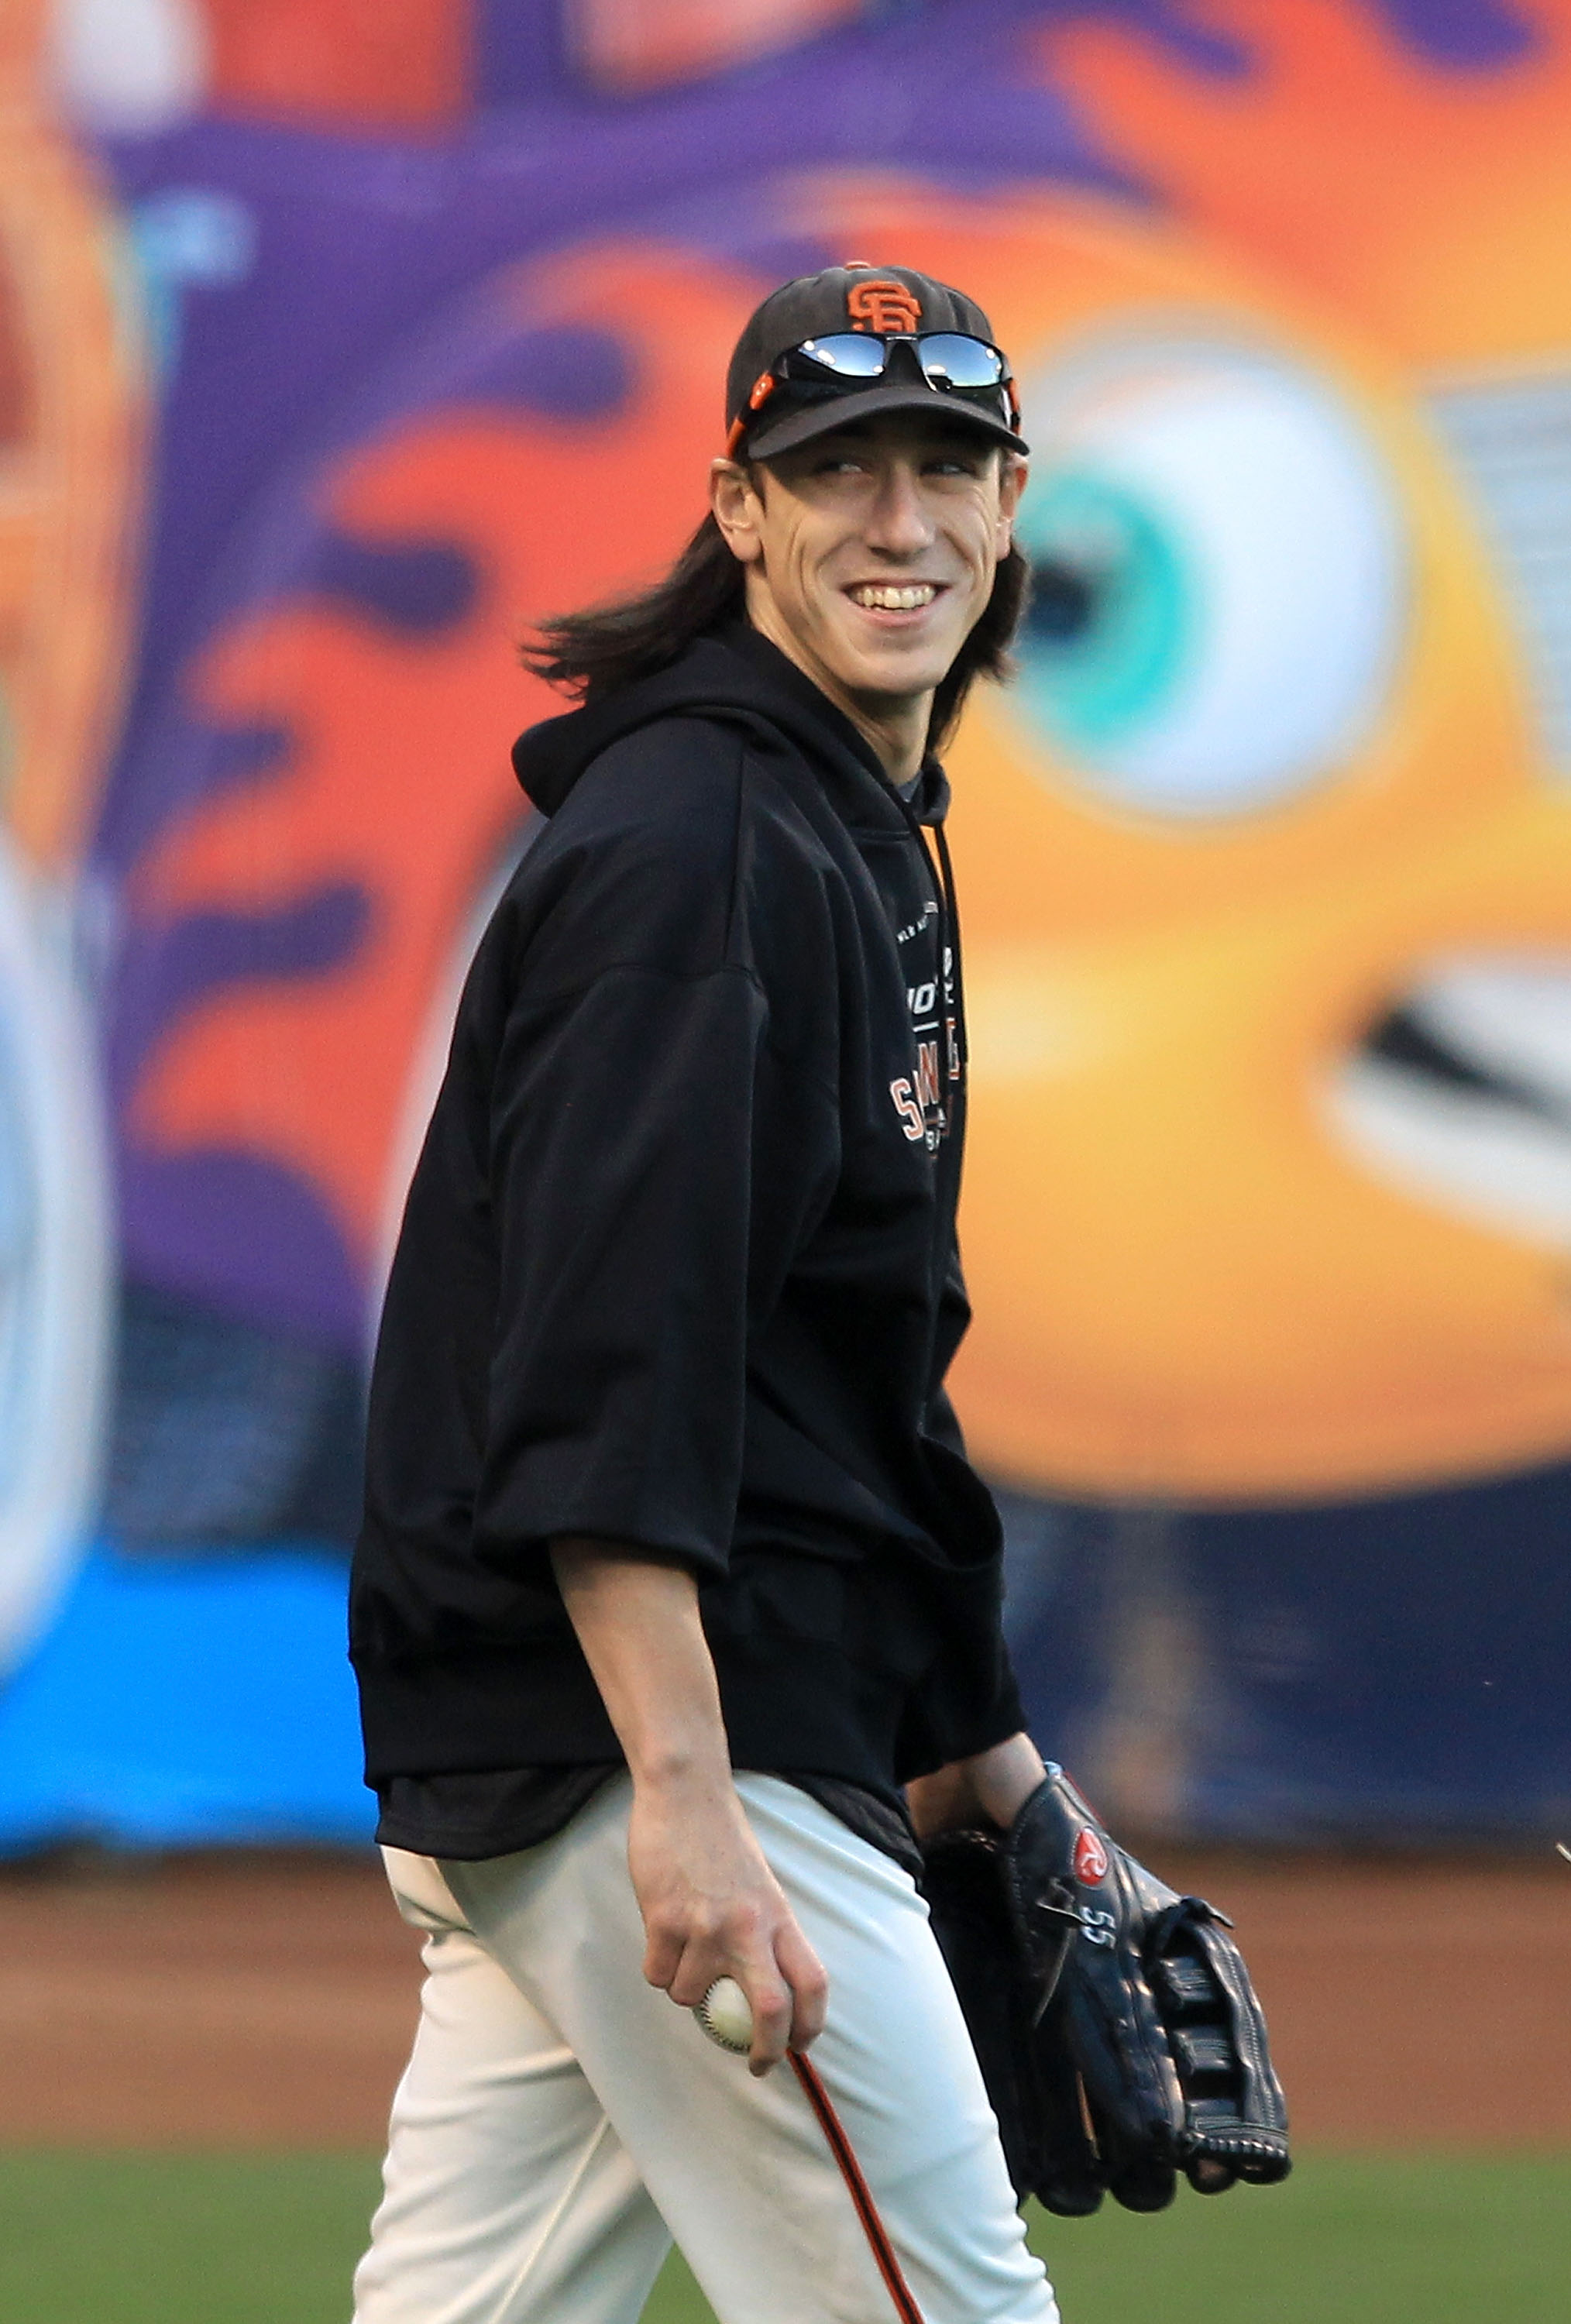 SAN FRANCISCO - OCTOBER 26:  Tim Lincecum #55 of the San Francisco Giants stands on the field during a workout session at AT&T Park on October 26, 2010 in San Francisco, California. The Texas Rangers will face off against the San Francisco Giants in Game